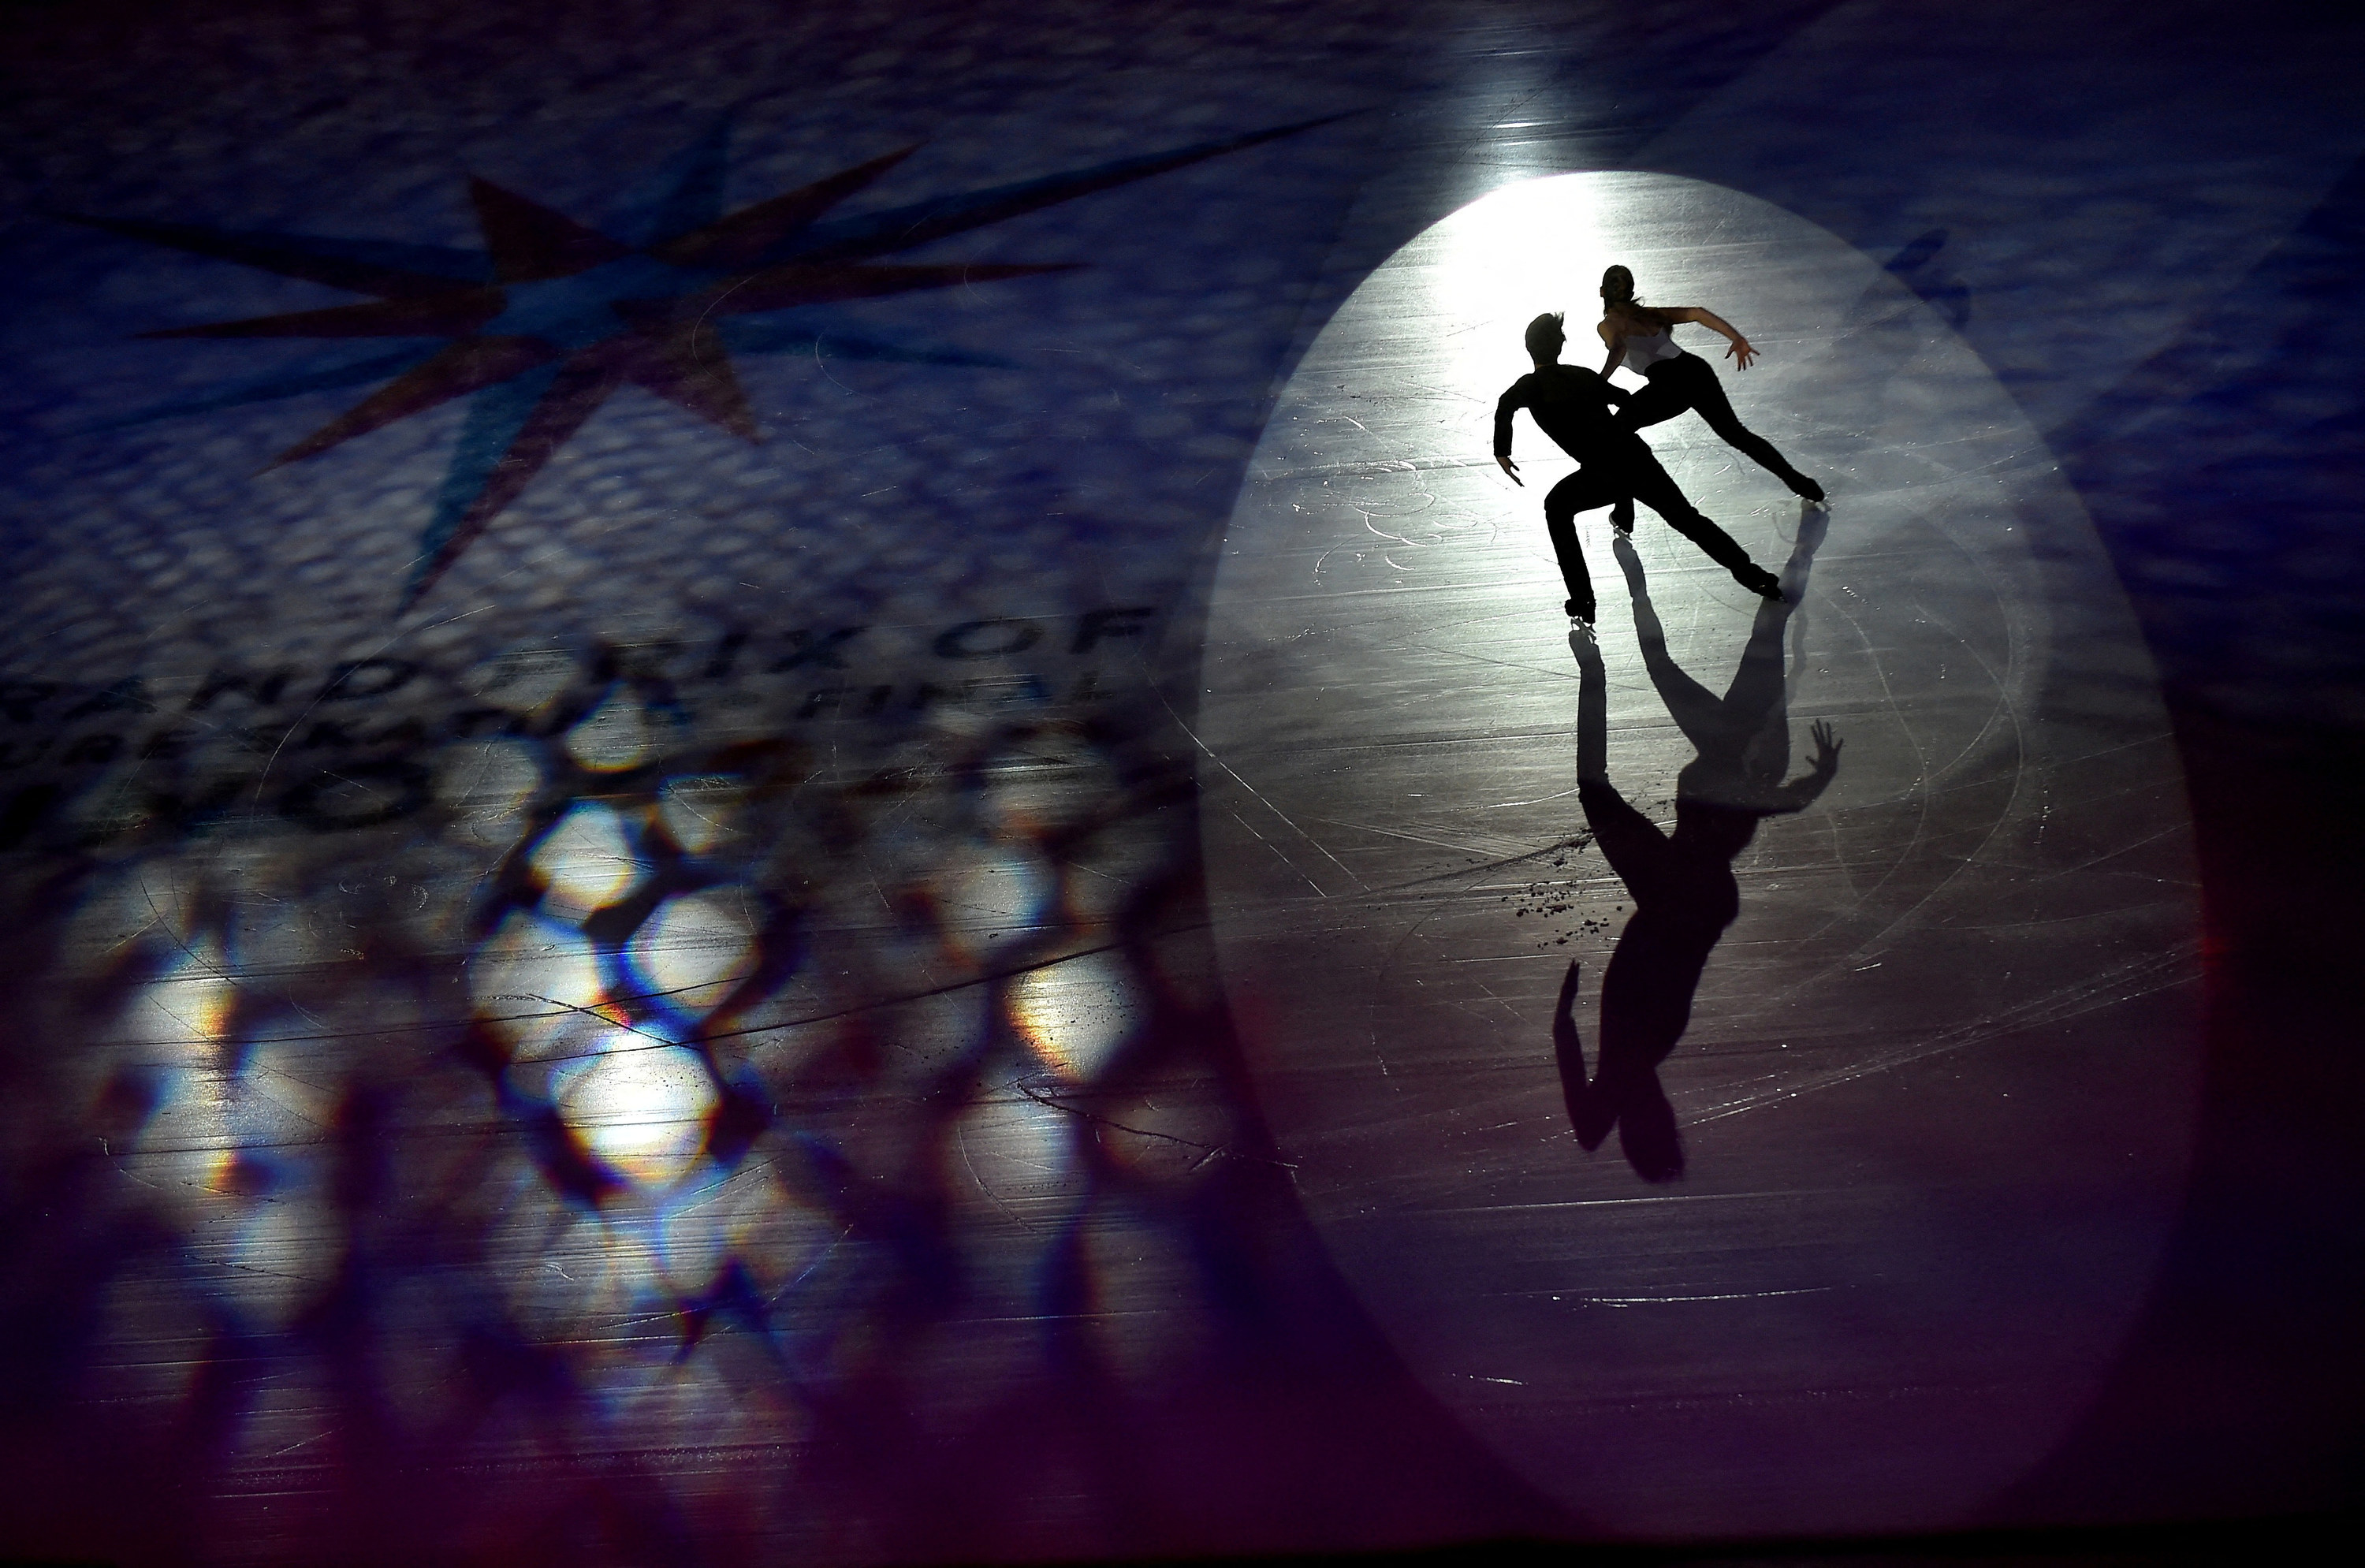 On a darkened ice rink stage, two figure skaters dance side by side